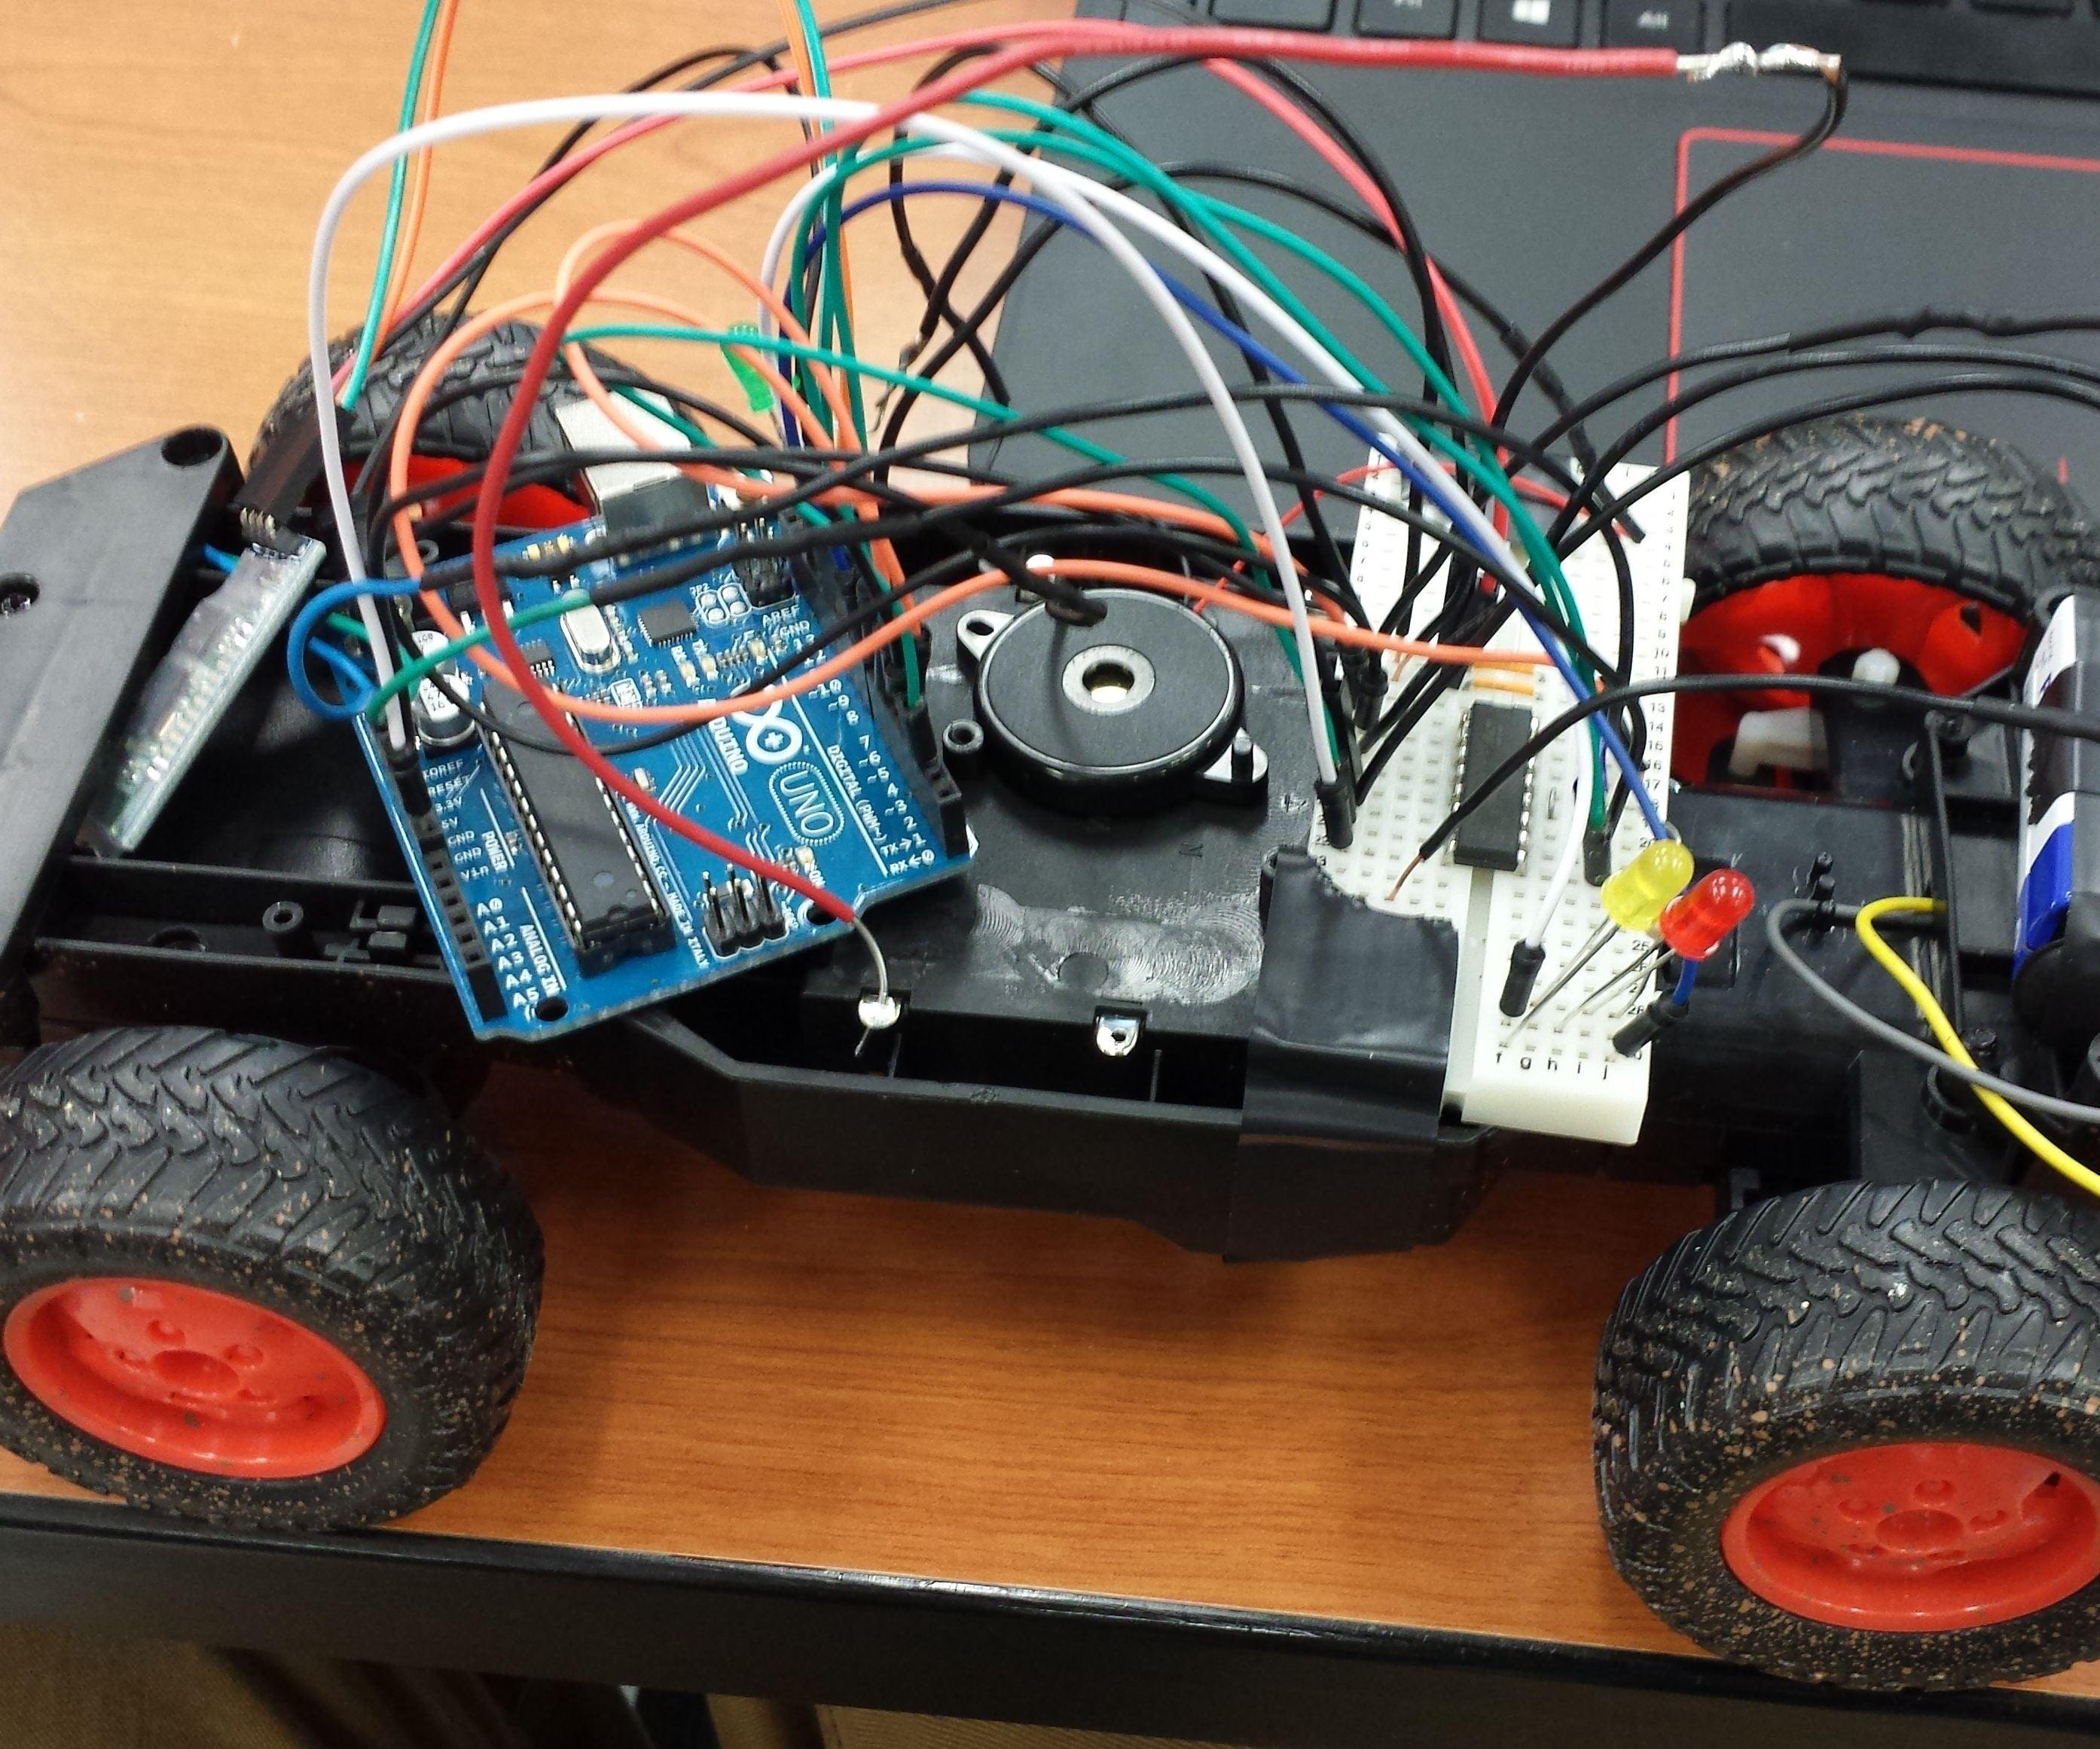 Bluetooth Rc Car: The Limitations of Bluetooth RC Cars: Range and Compatibility Issues 